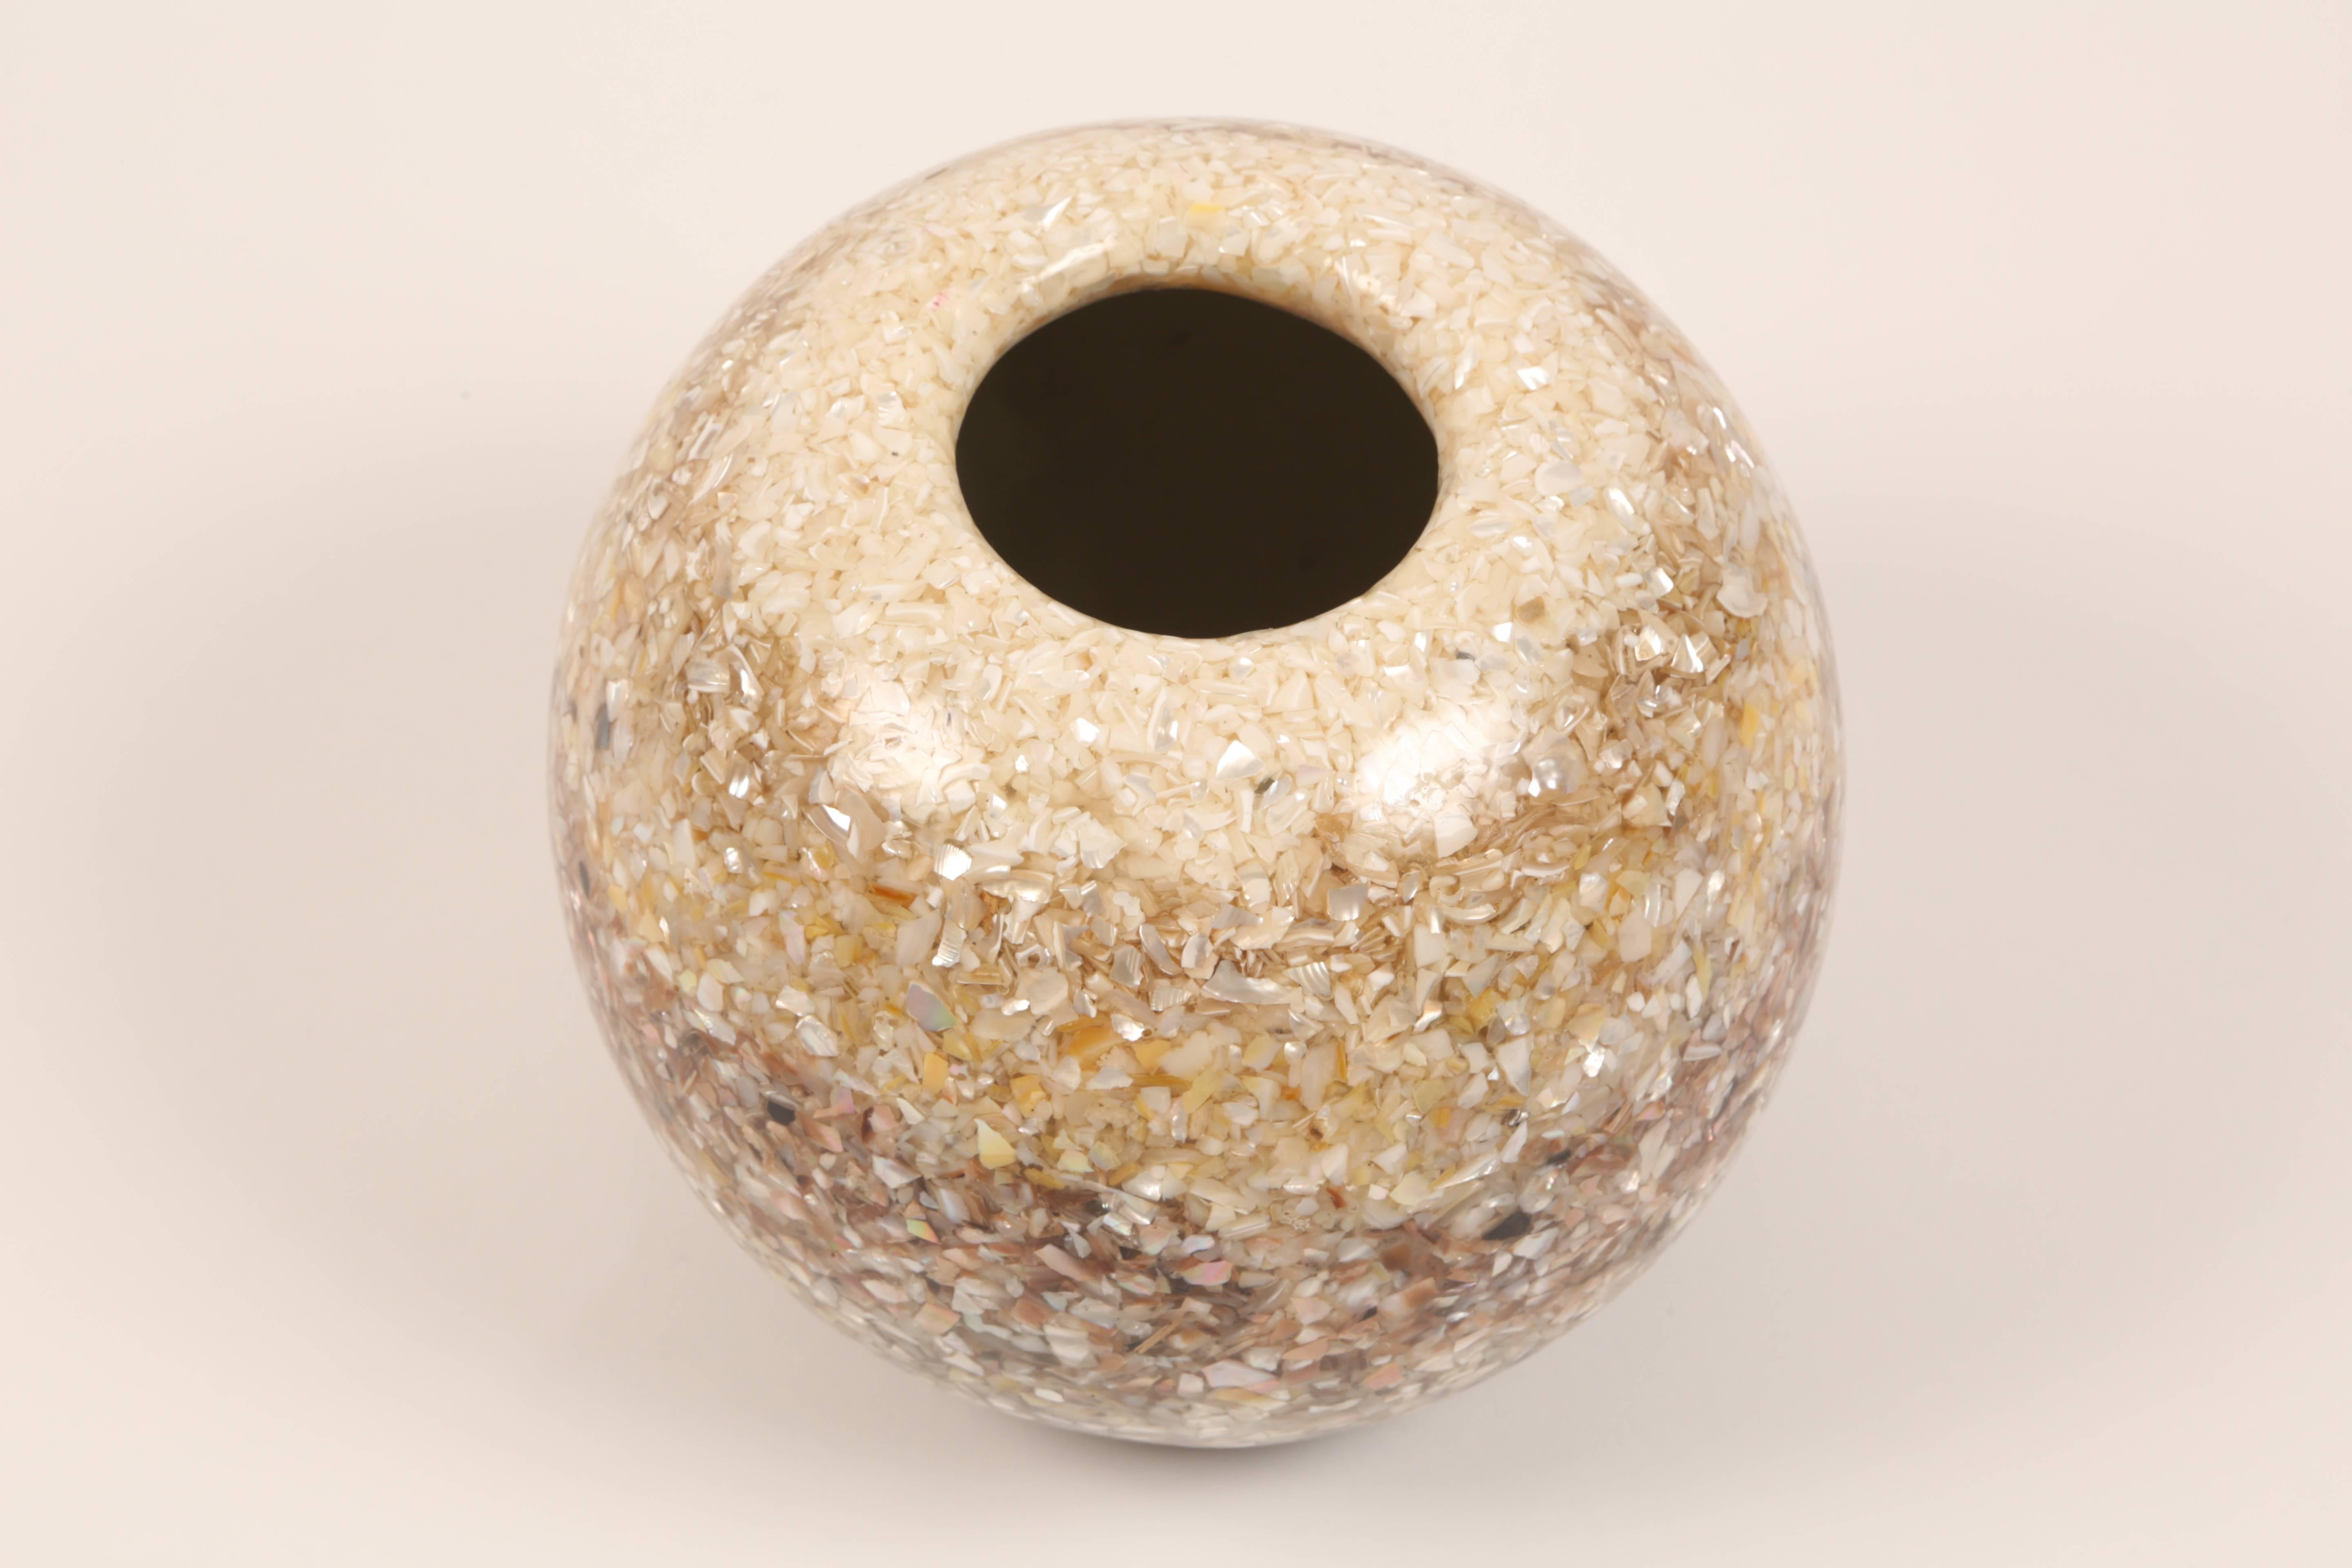 American Mother-of-pearl and Sea Shell Encrusted Resin Vase